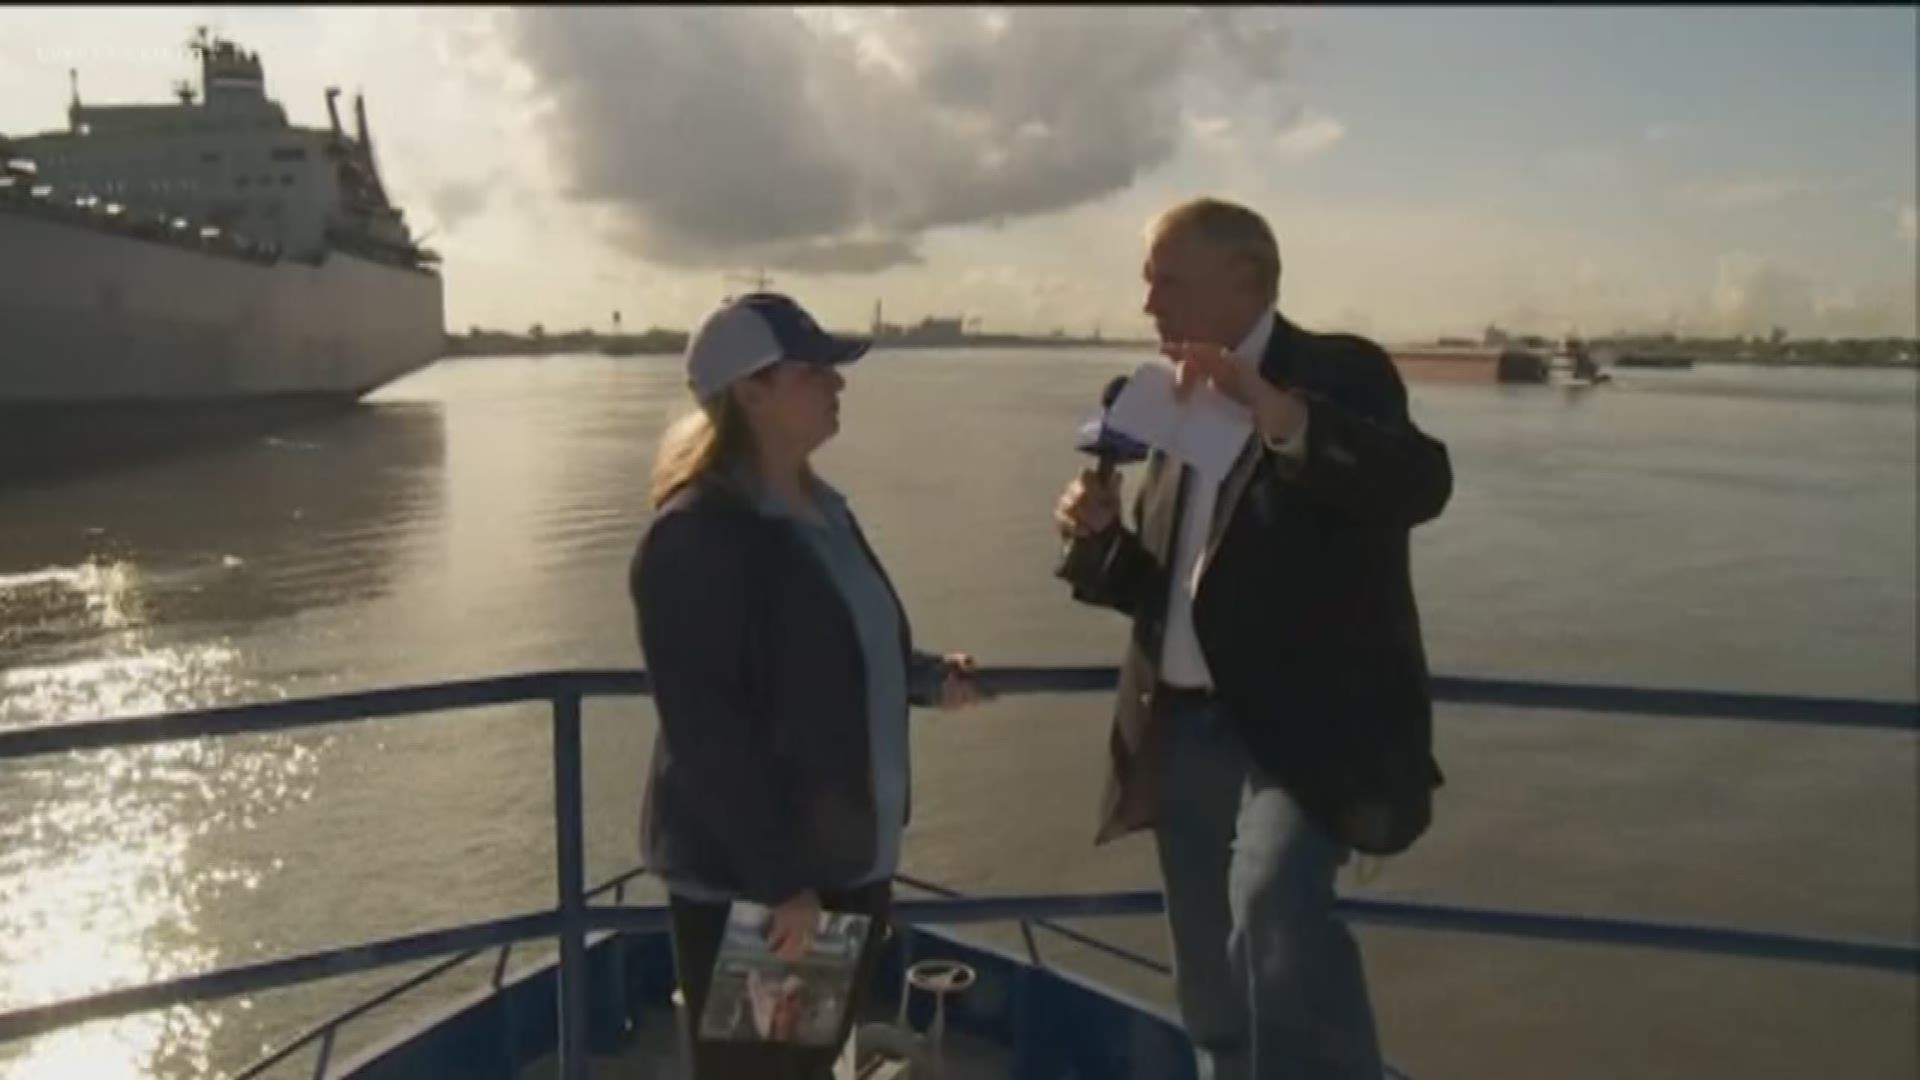 In honor of National Maritime Day, Eric Paulsen spoke to Amelia Pellegrin, the Director of Sustainable Development for the Port of New Orleans.